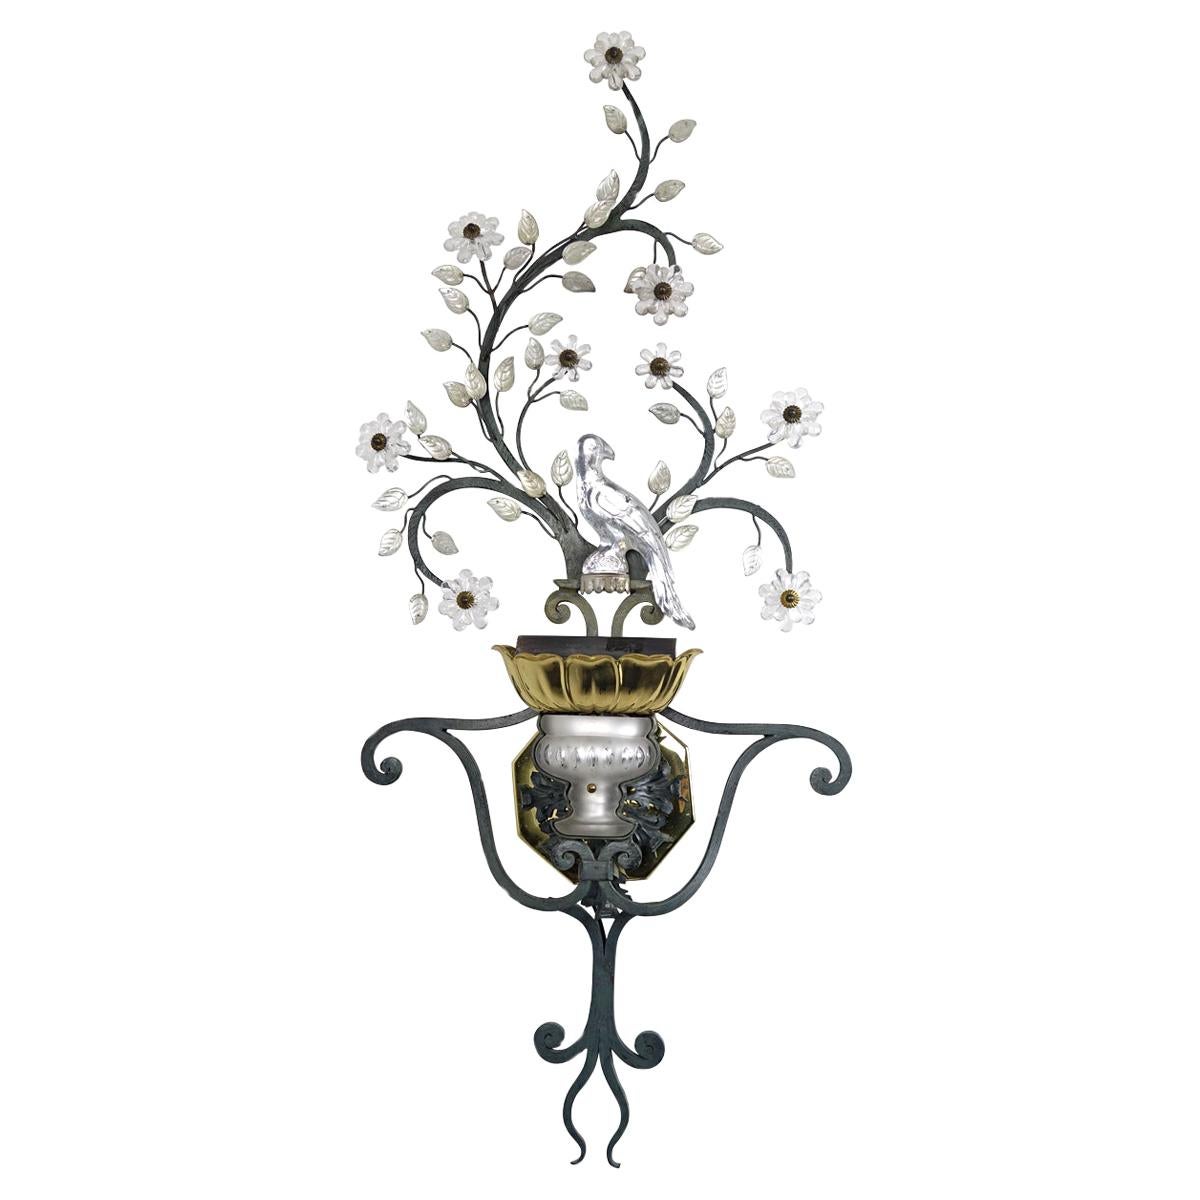 Large Italian Sconce with Crystal Bird, Flowers and Leaves by Banci Firenze